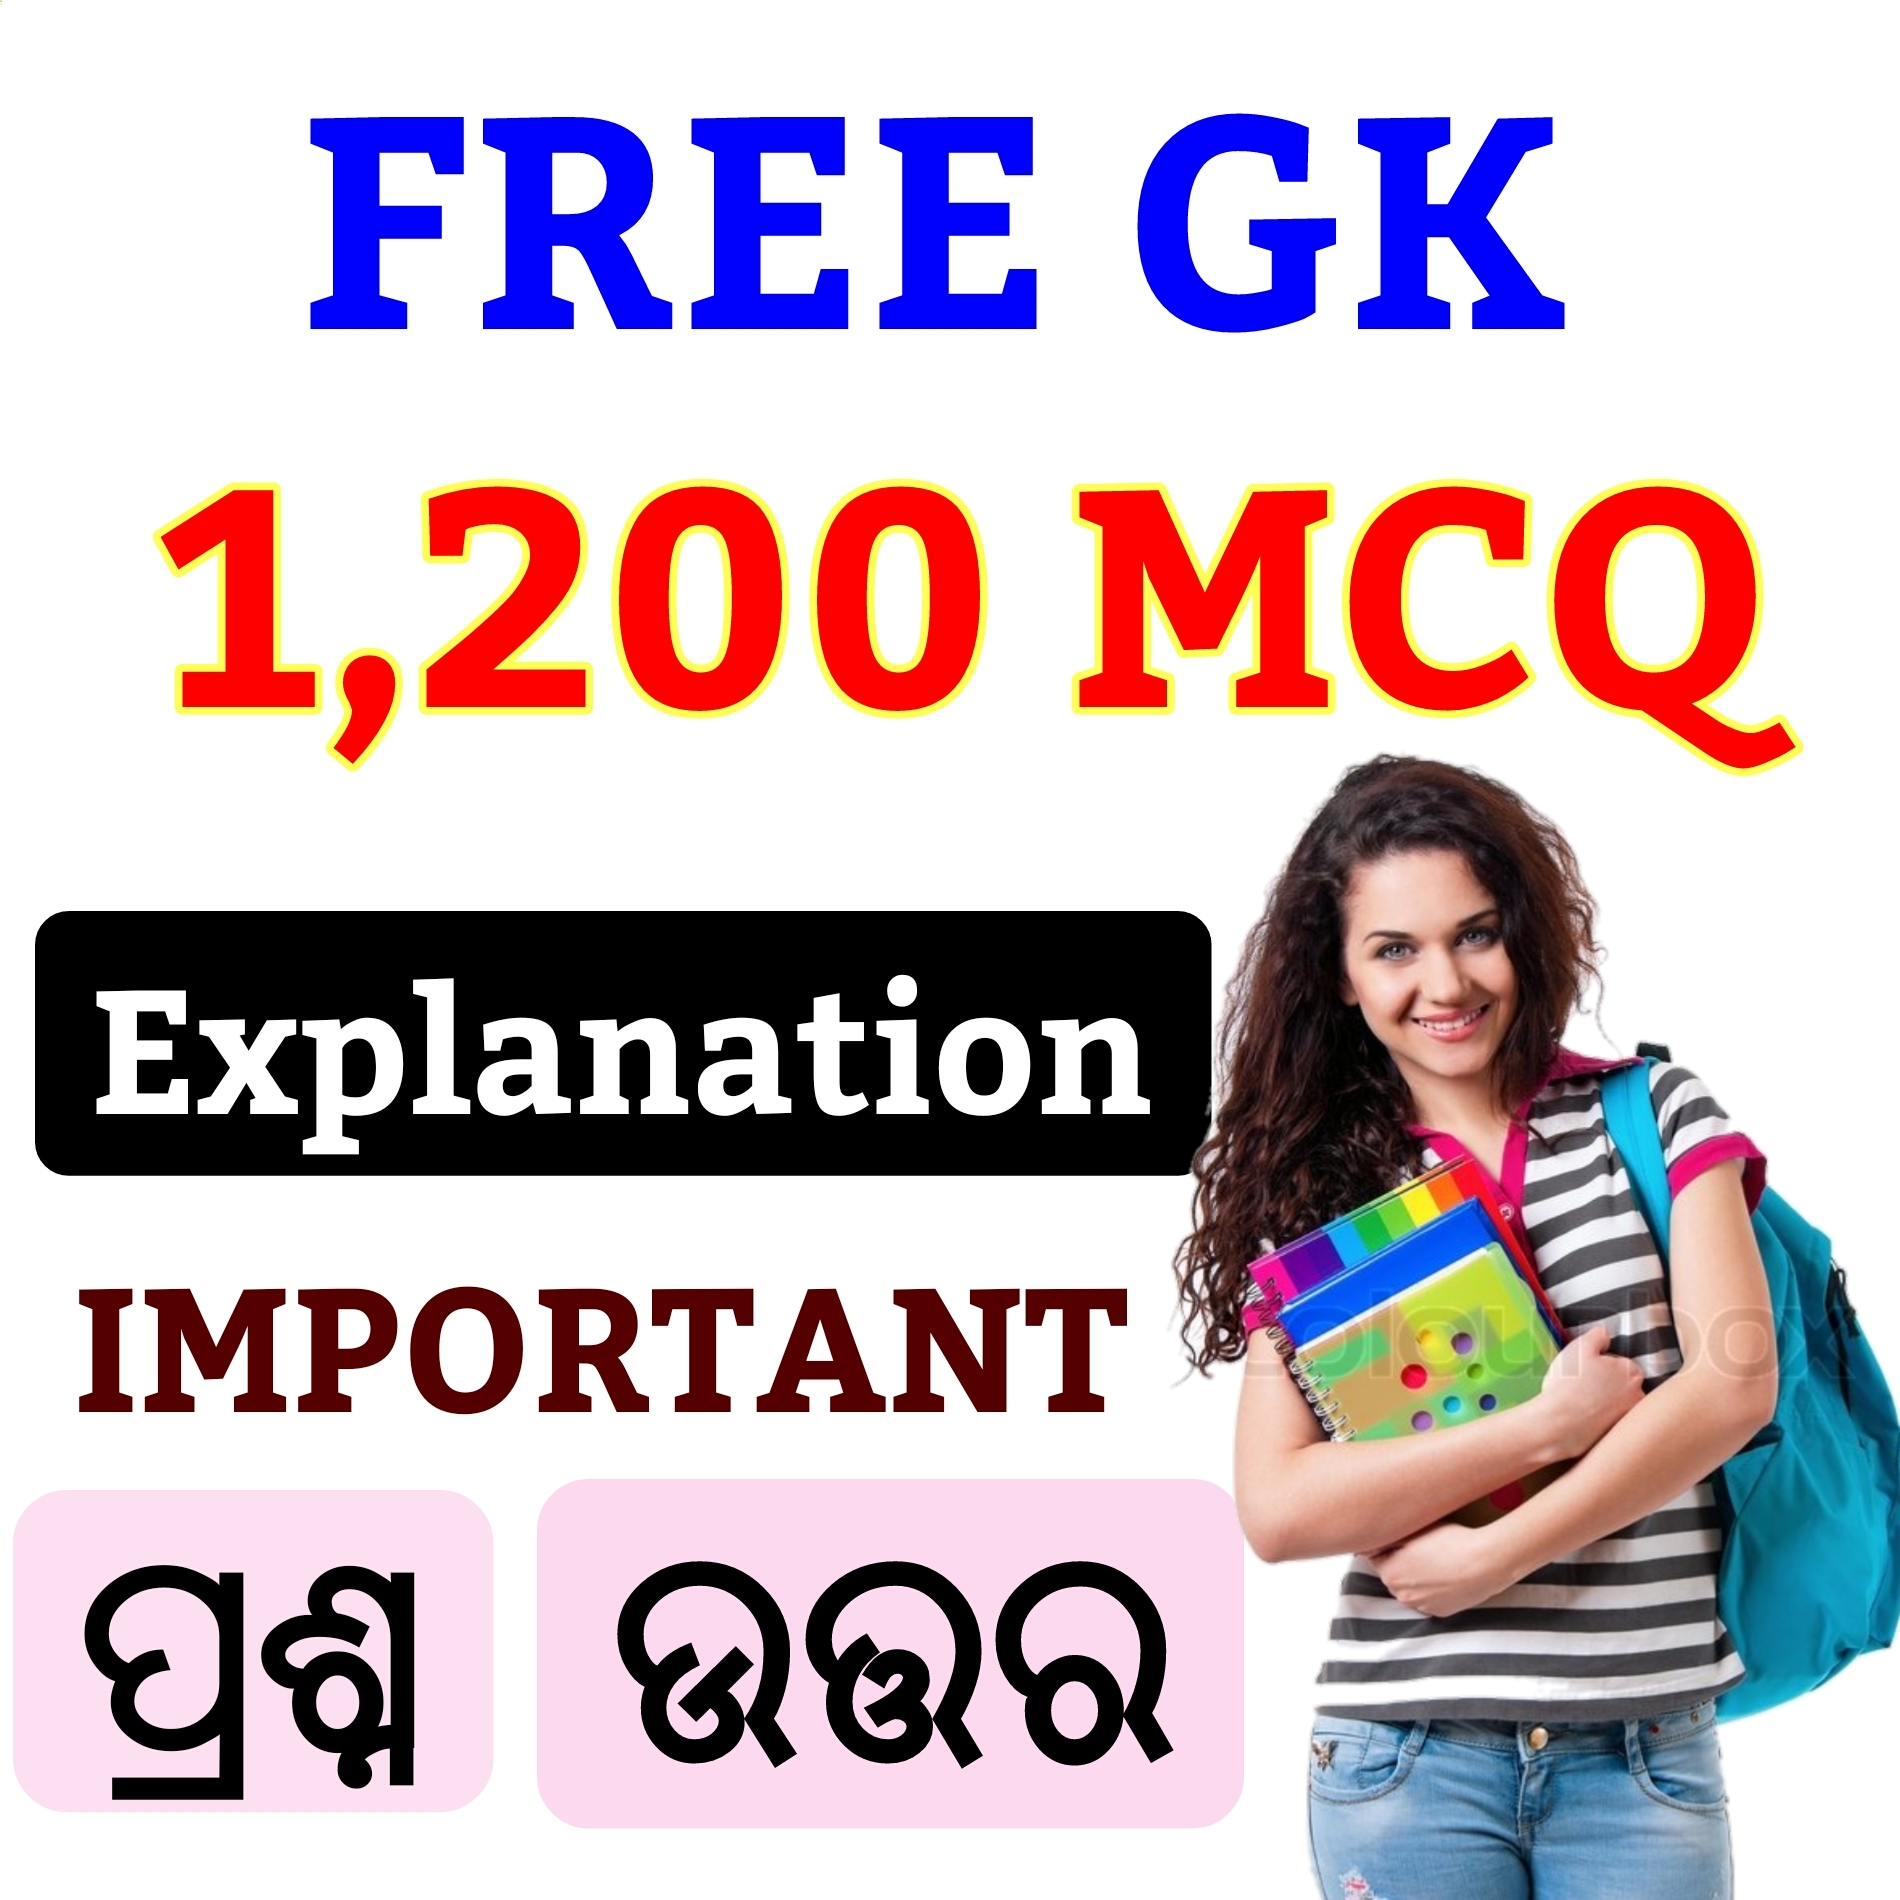 A- ODISHA FIREMAN 2023 !! 20,000+ MCQ !! (Chapter Wise New & Previous Year Question Paper) !! 